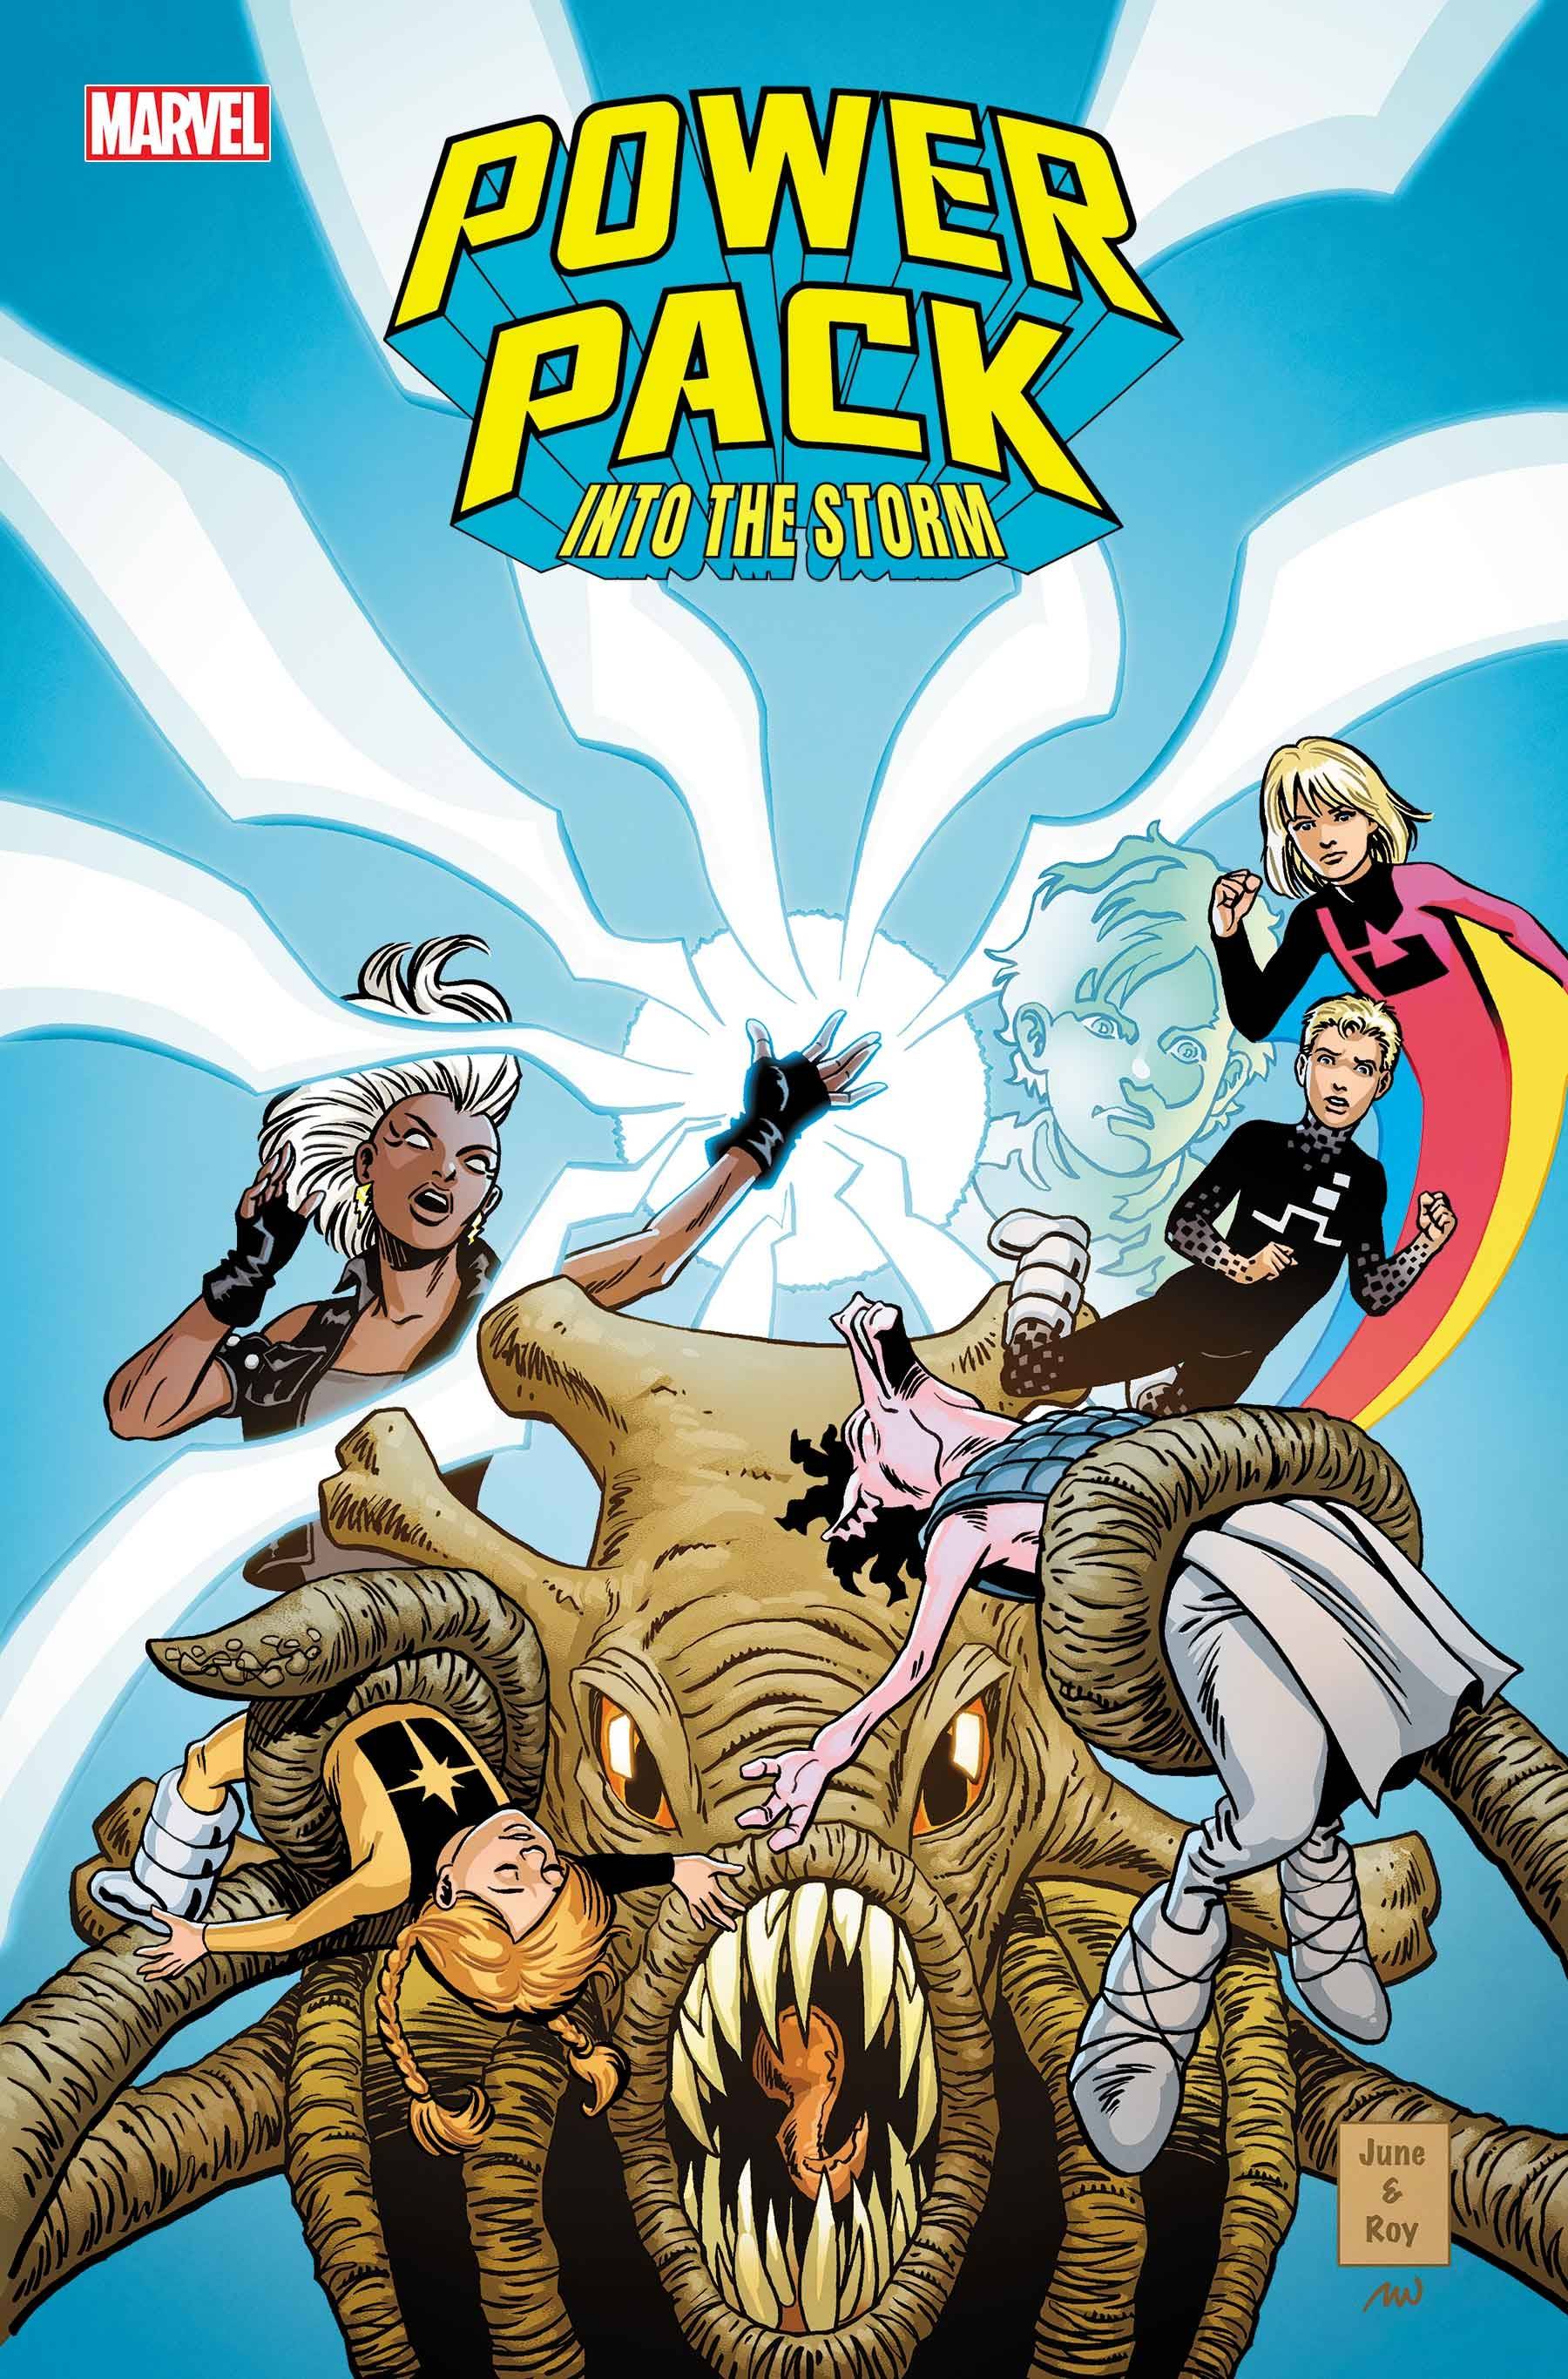 POWER PACK INTO THE STORM #3